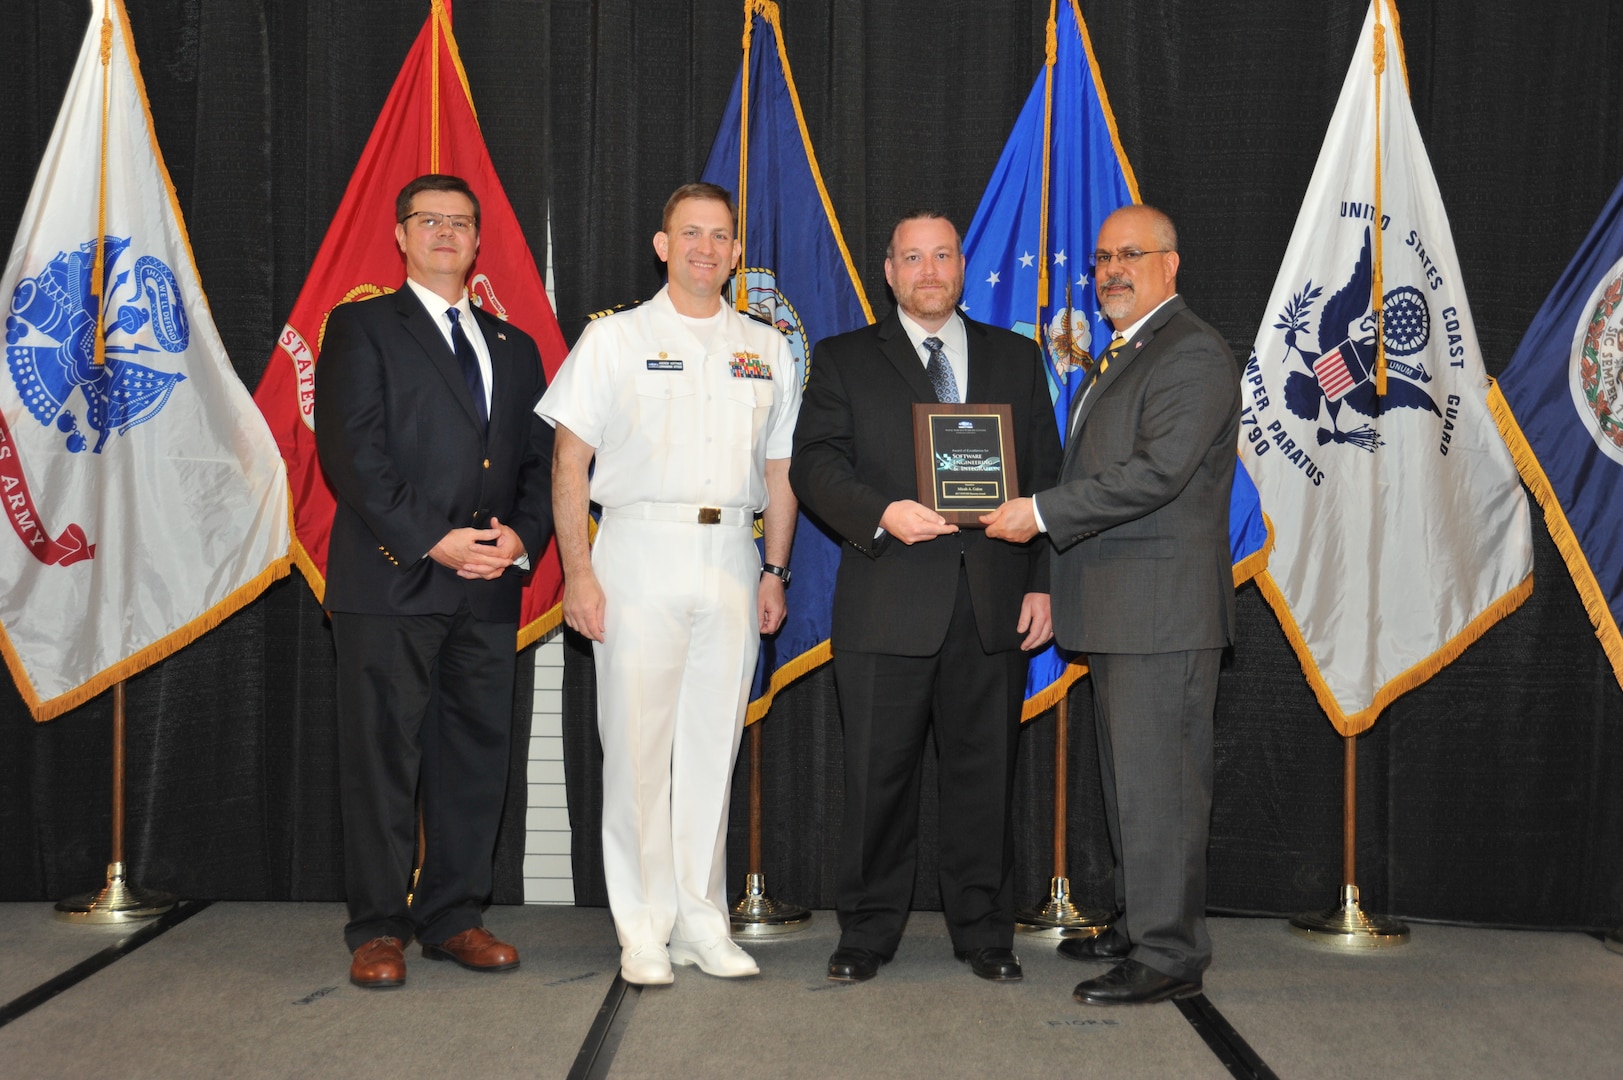 IMAGE: Micah Colon is presented the  NSWCDD Award of Excellence for Software Engineering and Integration at Naval Surface Warfare Center Dahlgren Division's annual awards ceremony, Apr. 26 at the Fredericksburg Expo and Conference Center.

The NSWCDD Award of Excellence for Software Engineering and Integration was established to recognize individuals who have made a notable and significant impact to NSWCDD through their outstanding performance in Software Engineering & Integration.